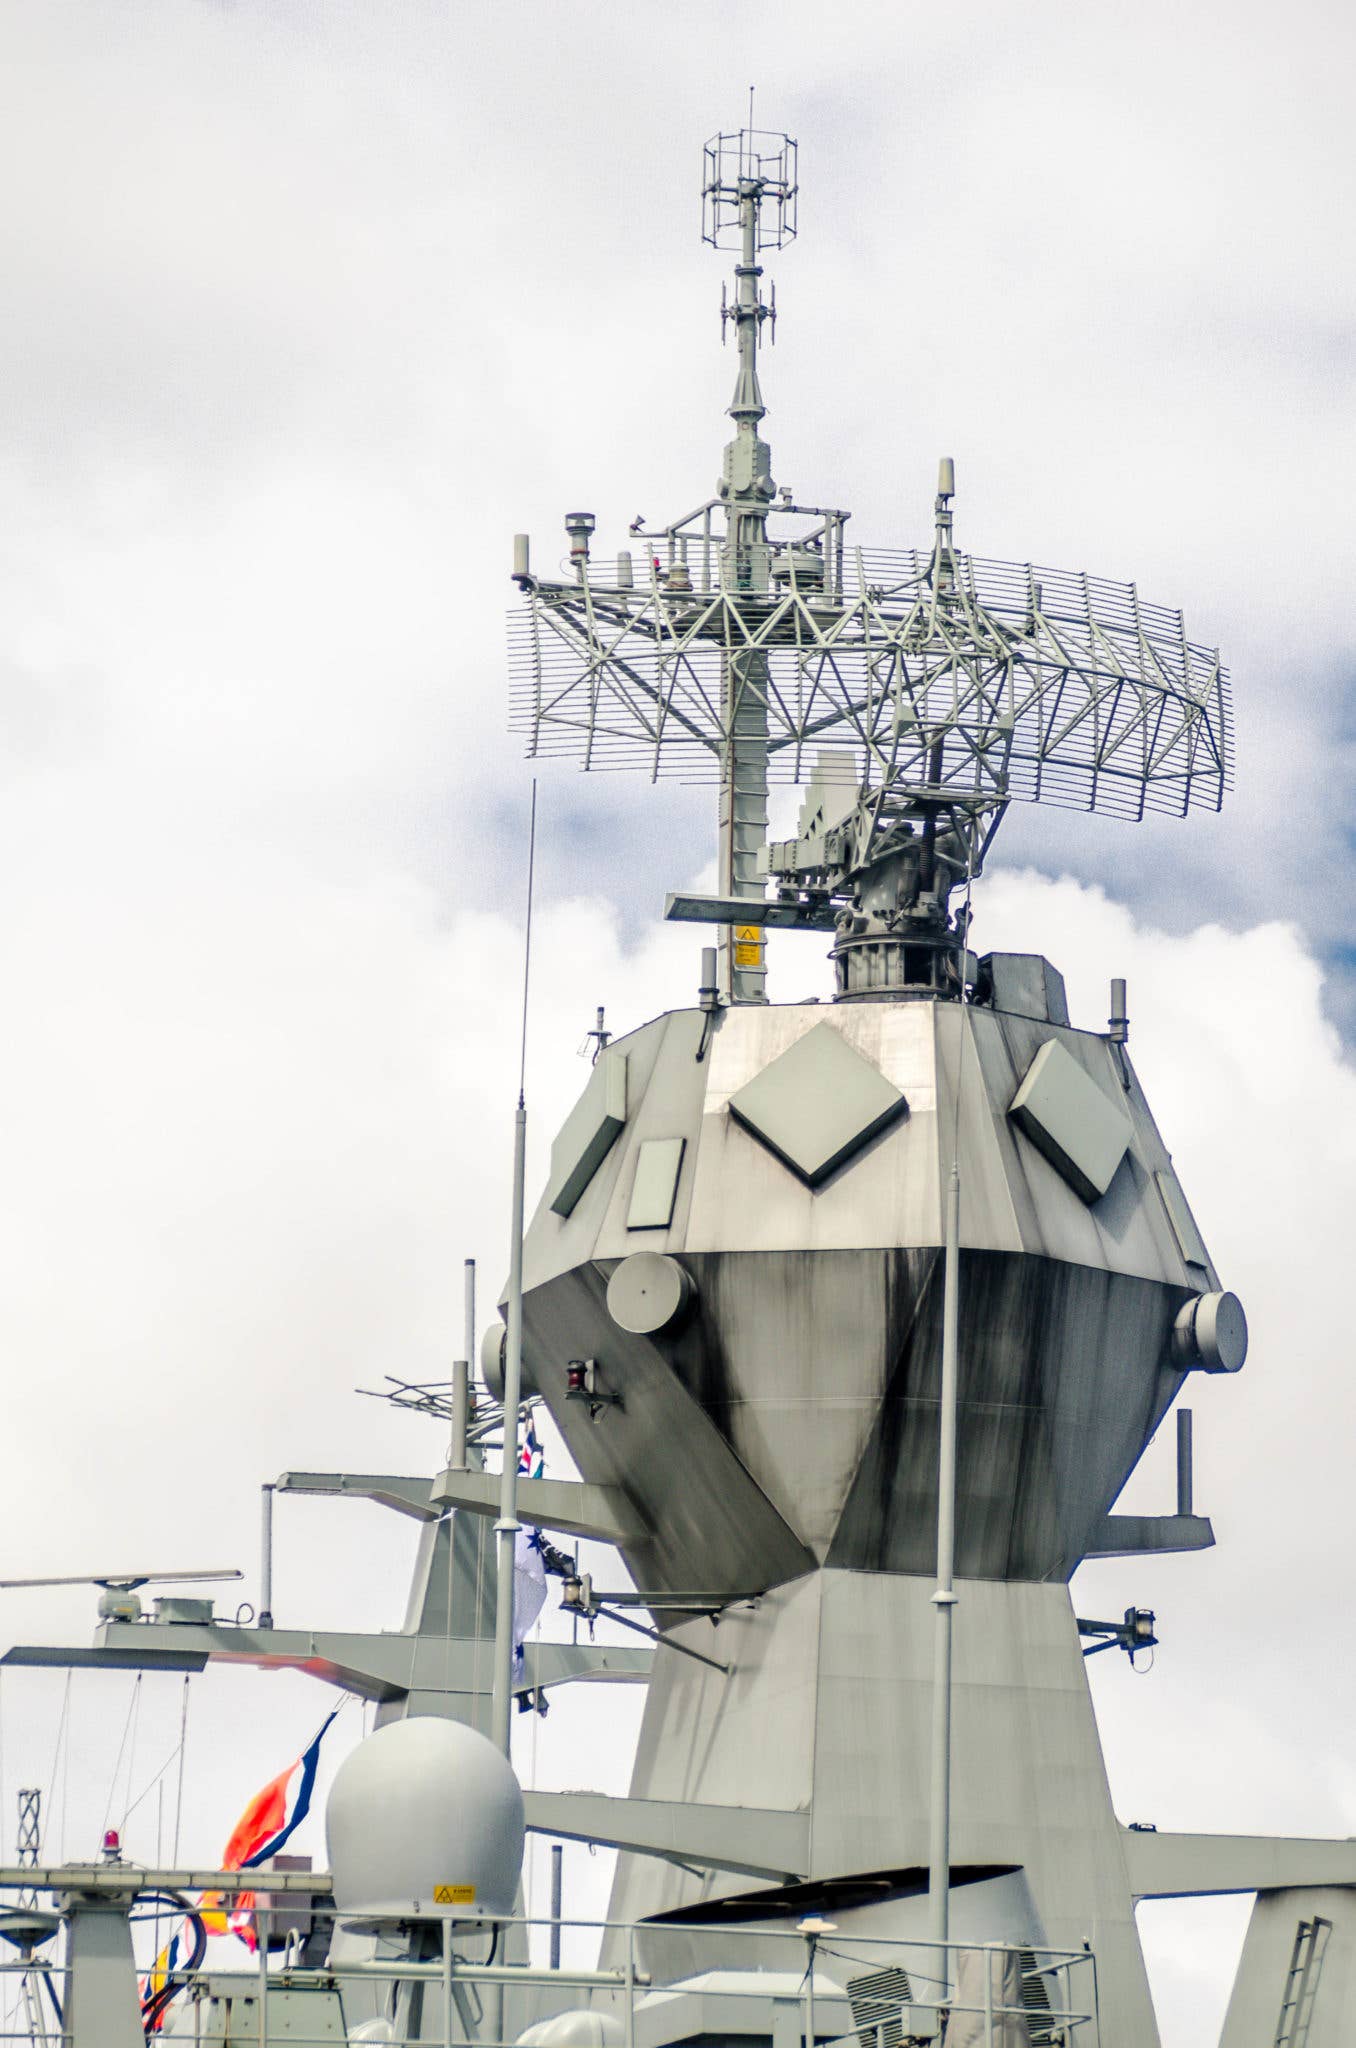 HMAS Perth (FFH 157) CEAFAR phased array radars. (Wikimedia Commons photo by Hpeterswald)